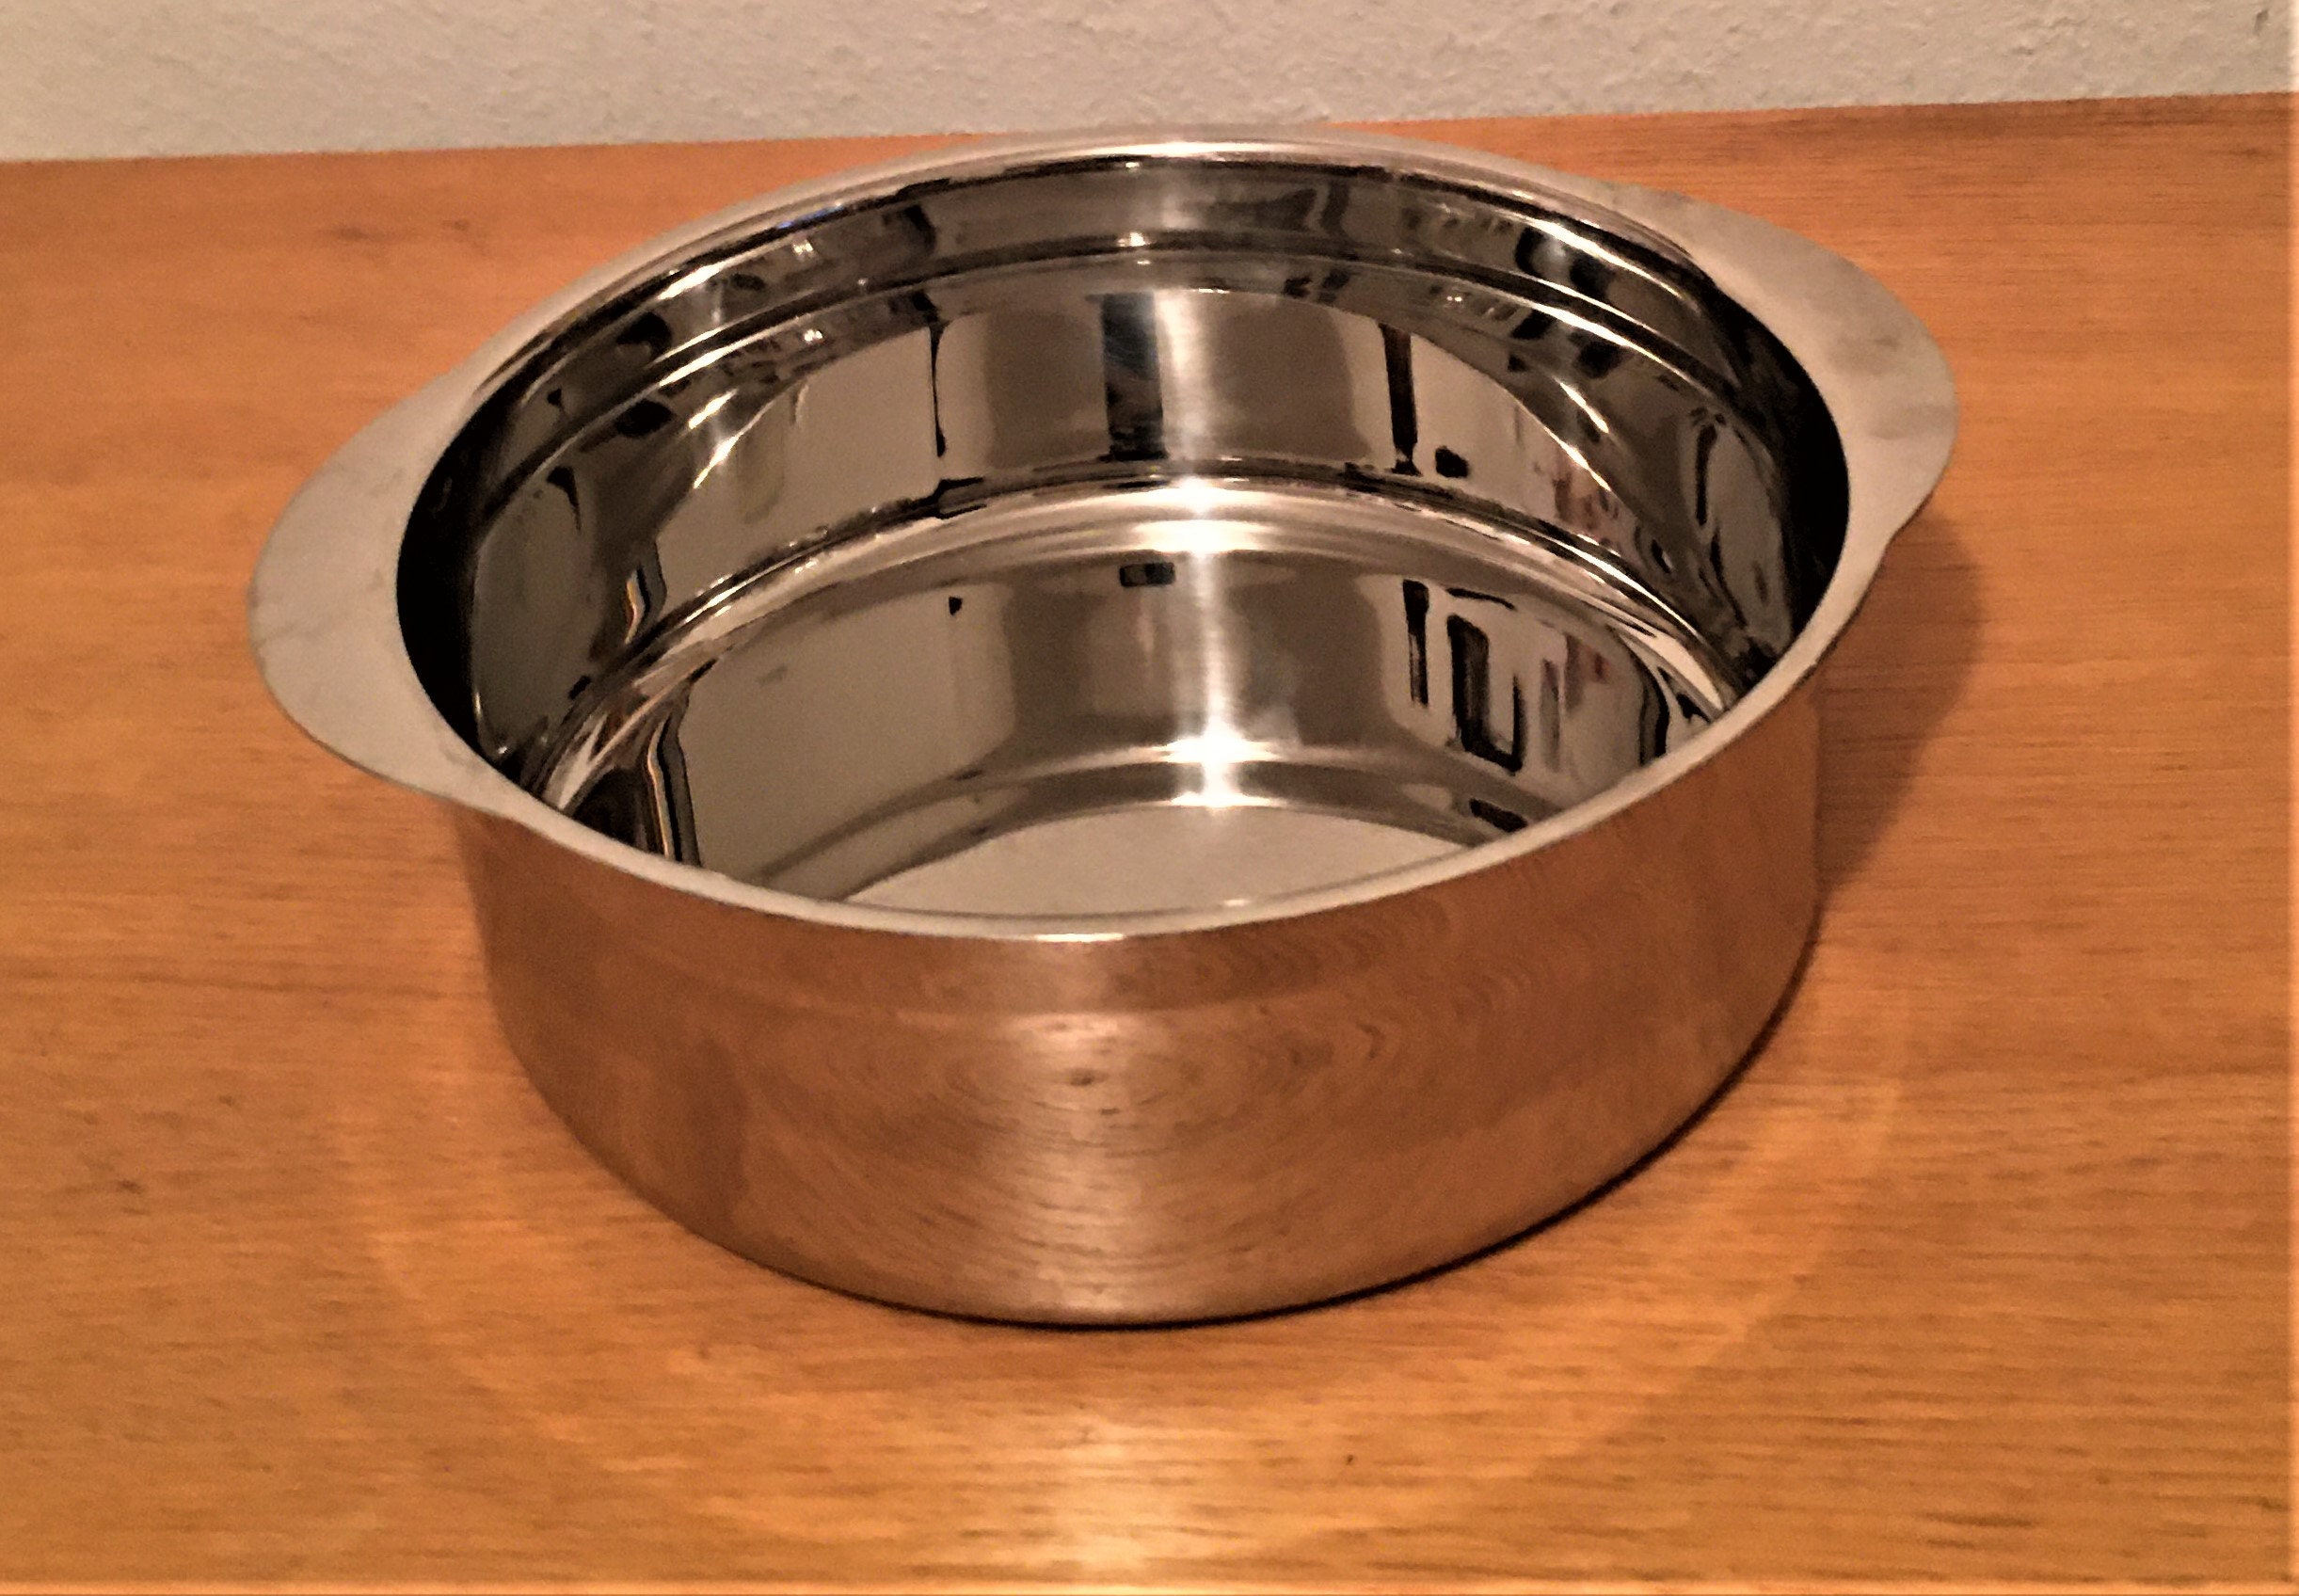 Baking Pan West Bend Bakeware 9 Inches USA Stainless Steel Stainless Steel  50s Mid Century Streamline Baking Cake Pan Casserole Dish Salad Master 